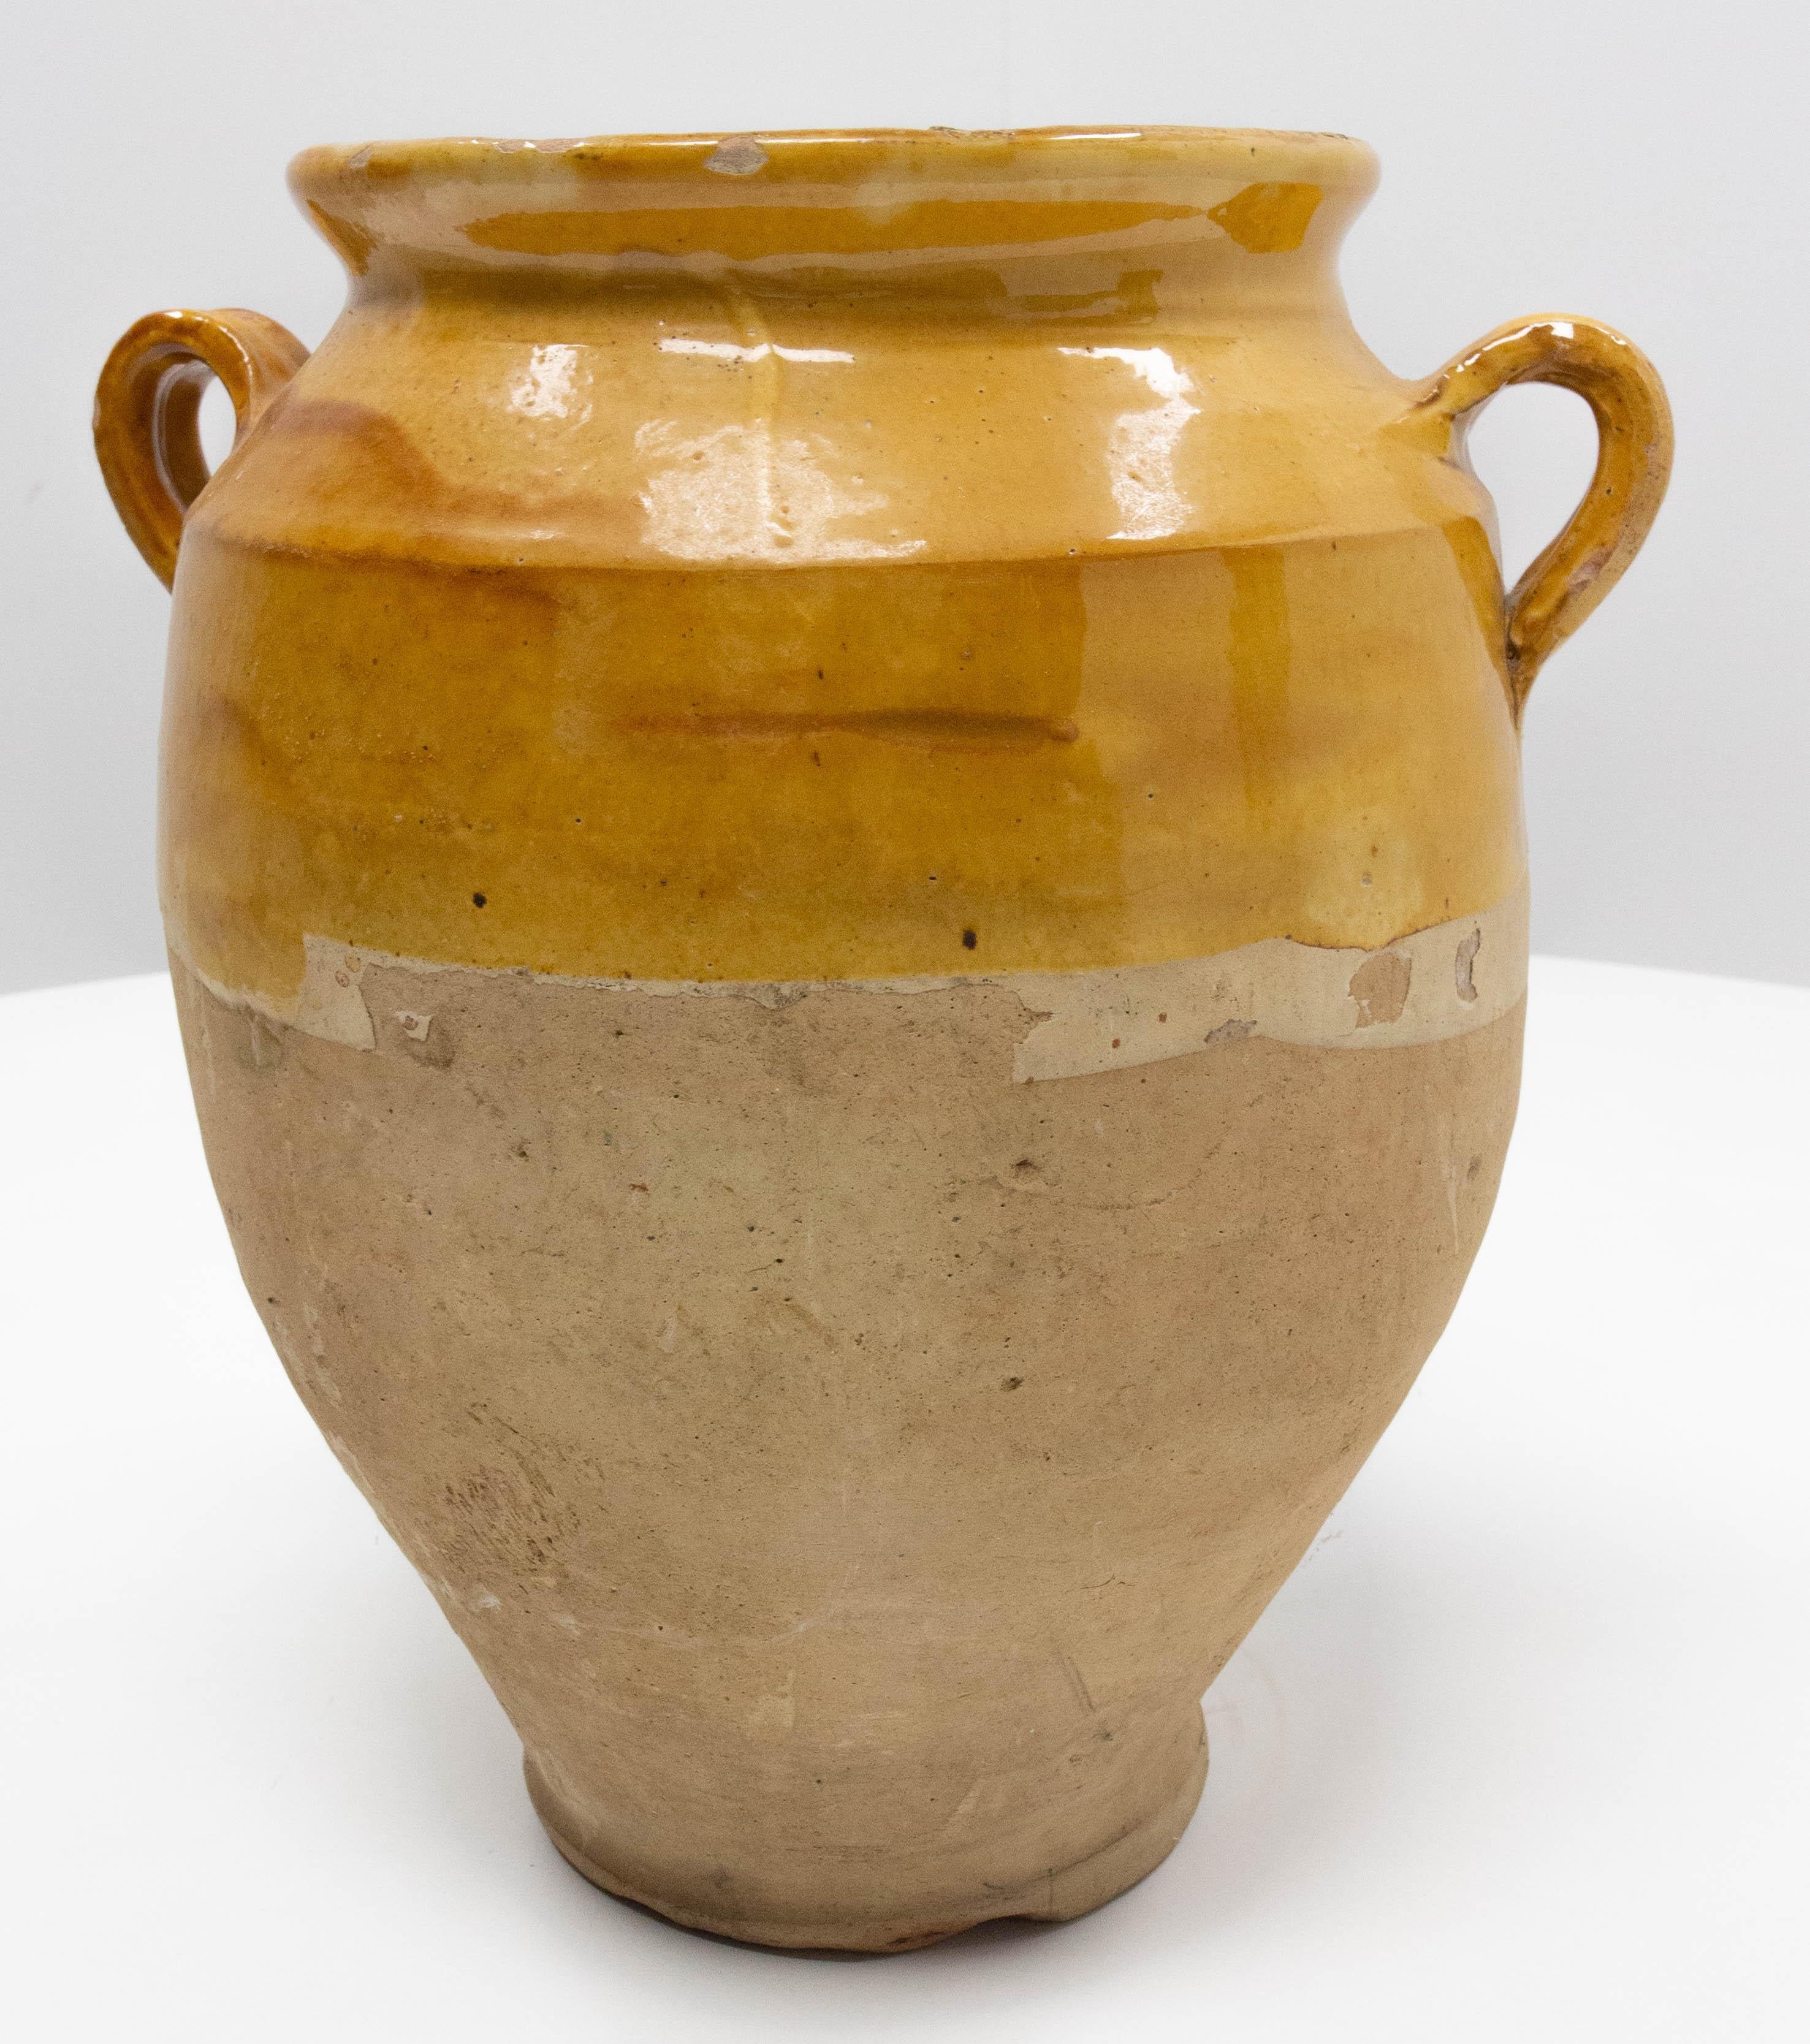 French terracotta confit pot
Traditional large earthenware pottery confit pot from South West France with yellow glaze
This vessel was used from the 19th to the mid-20th century to conserve food
Very decorative
Good patina and bright yellow